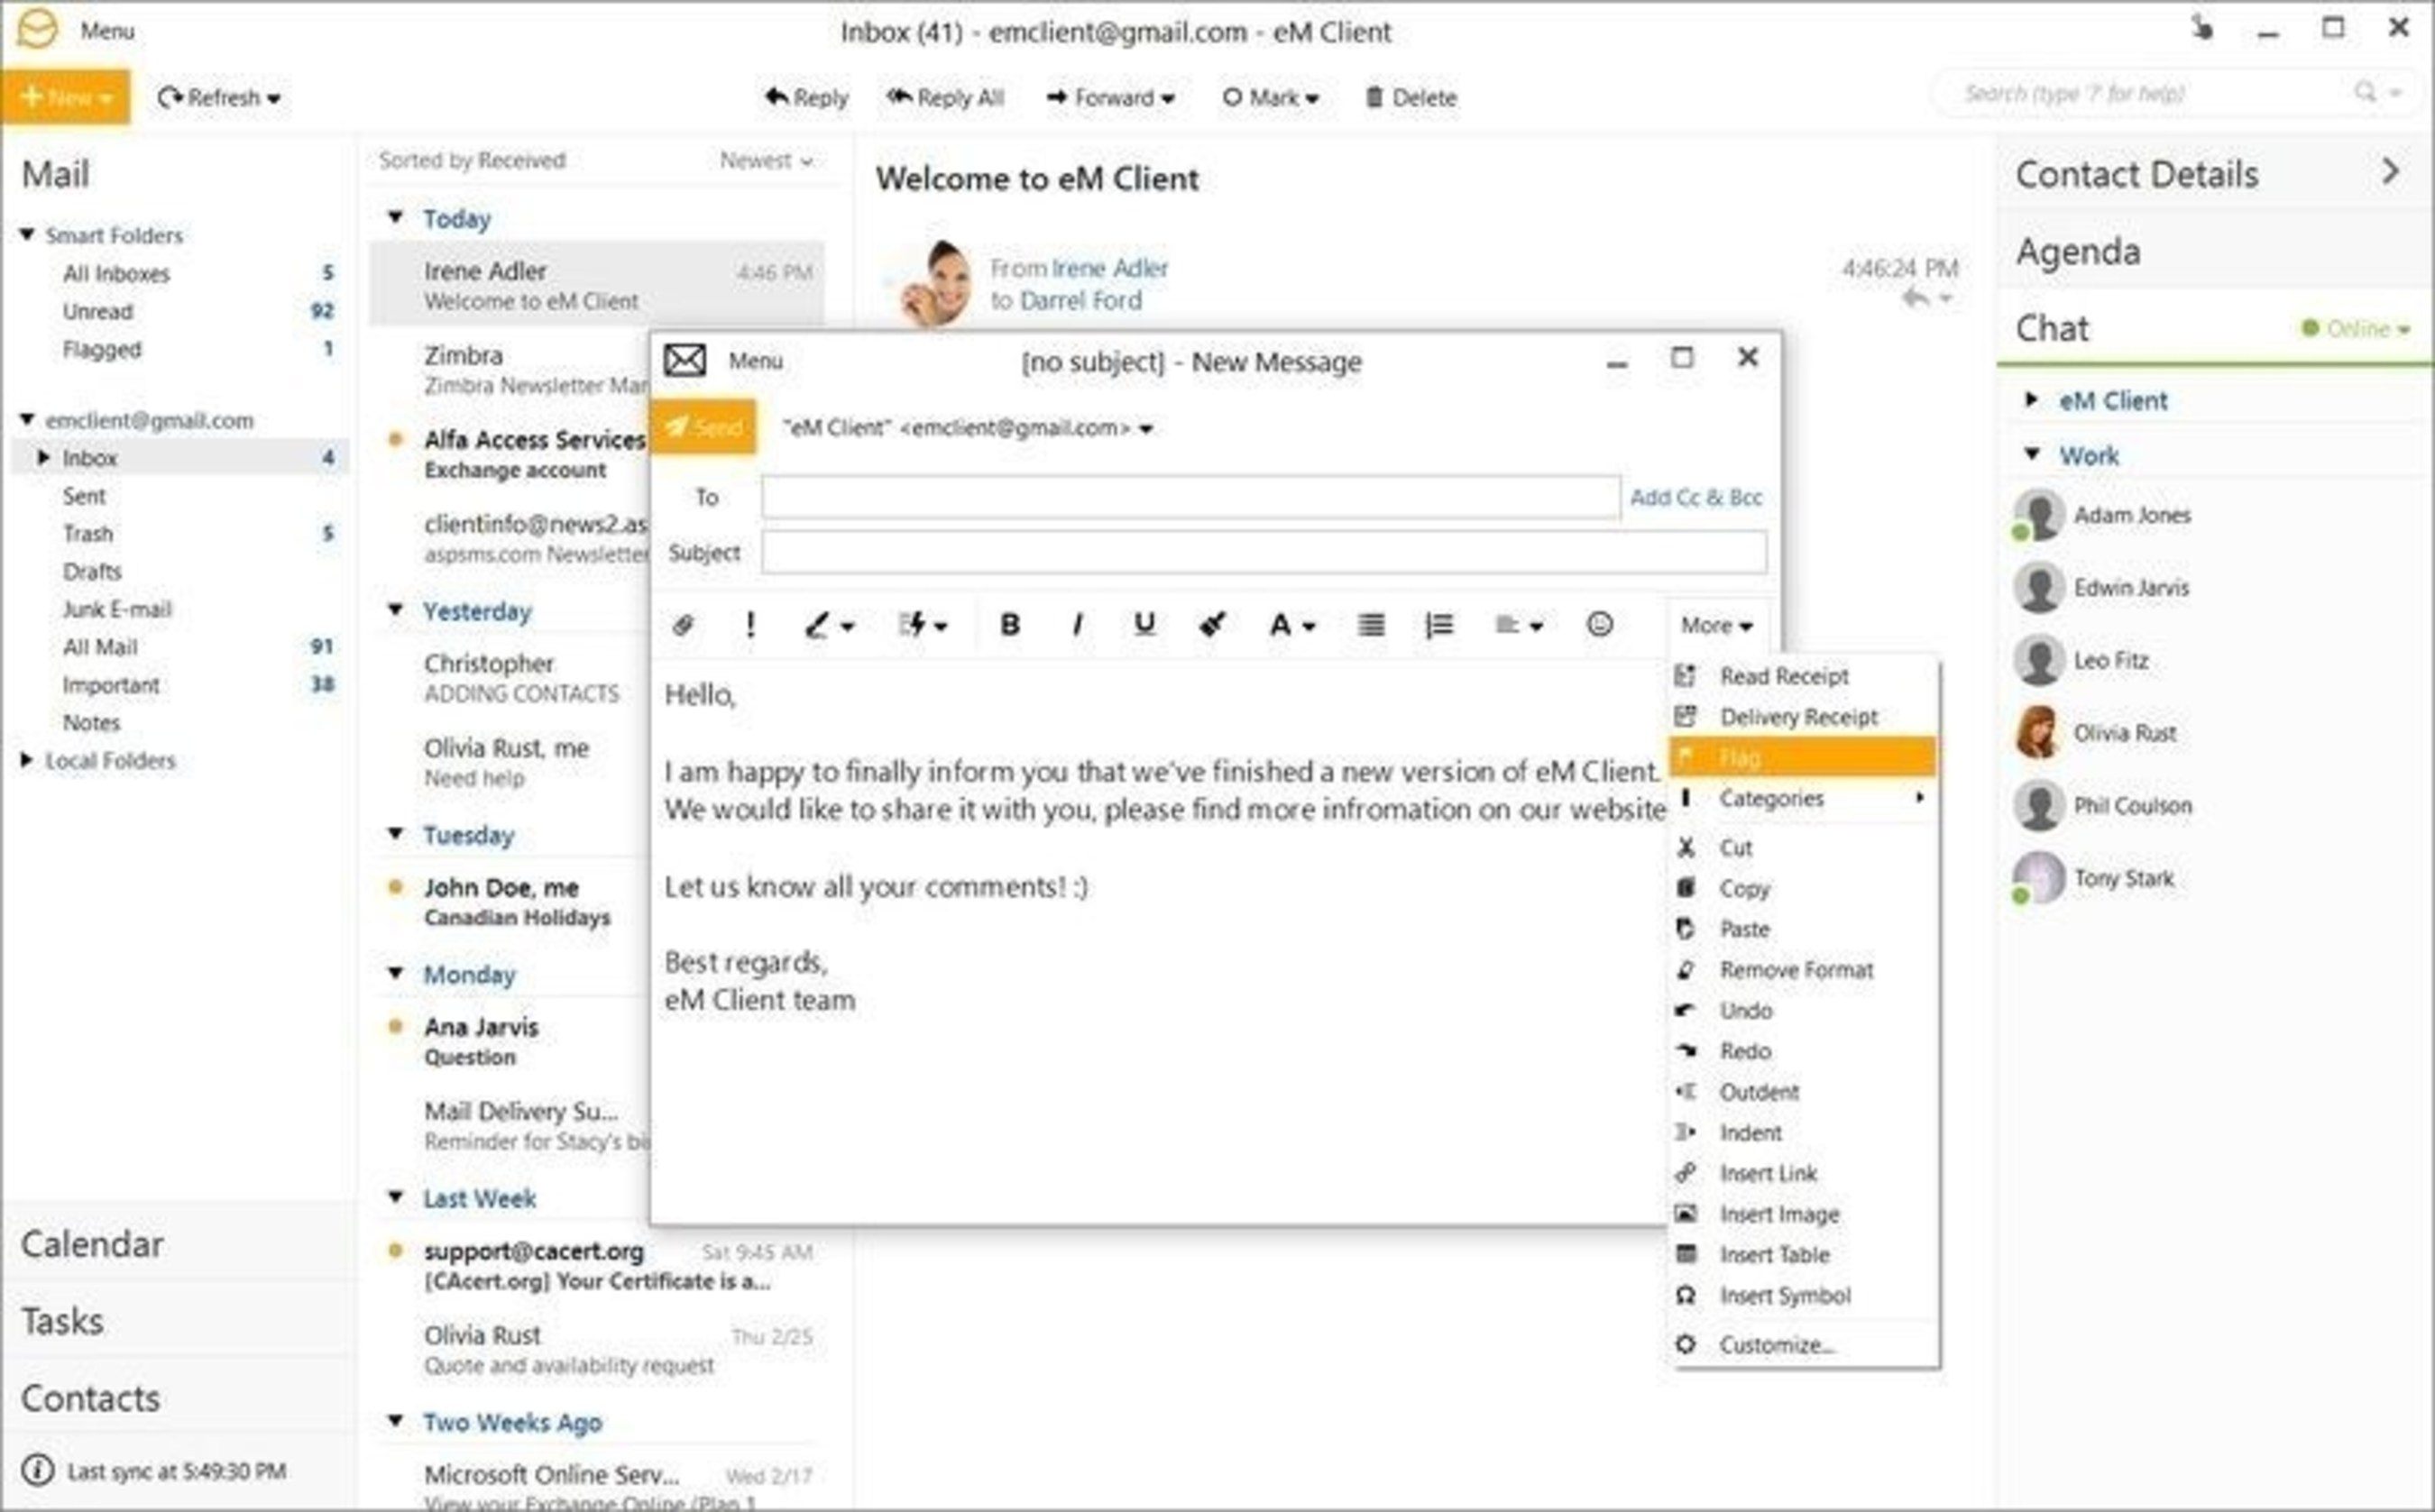 eM Client is a full featured e-mail client with a modern and easy to use interface.